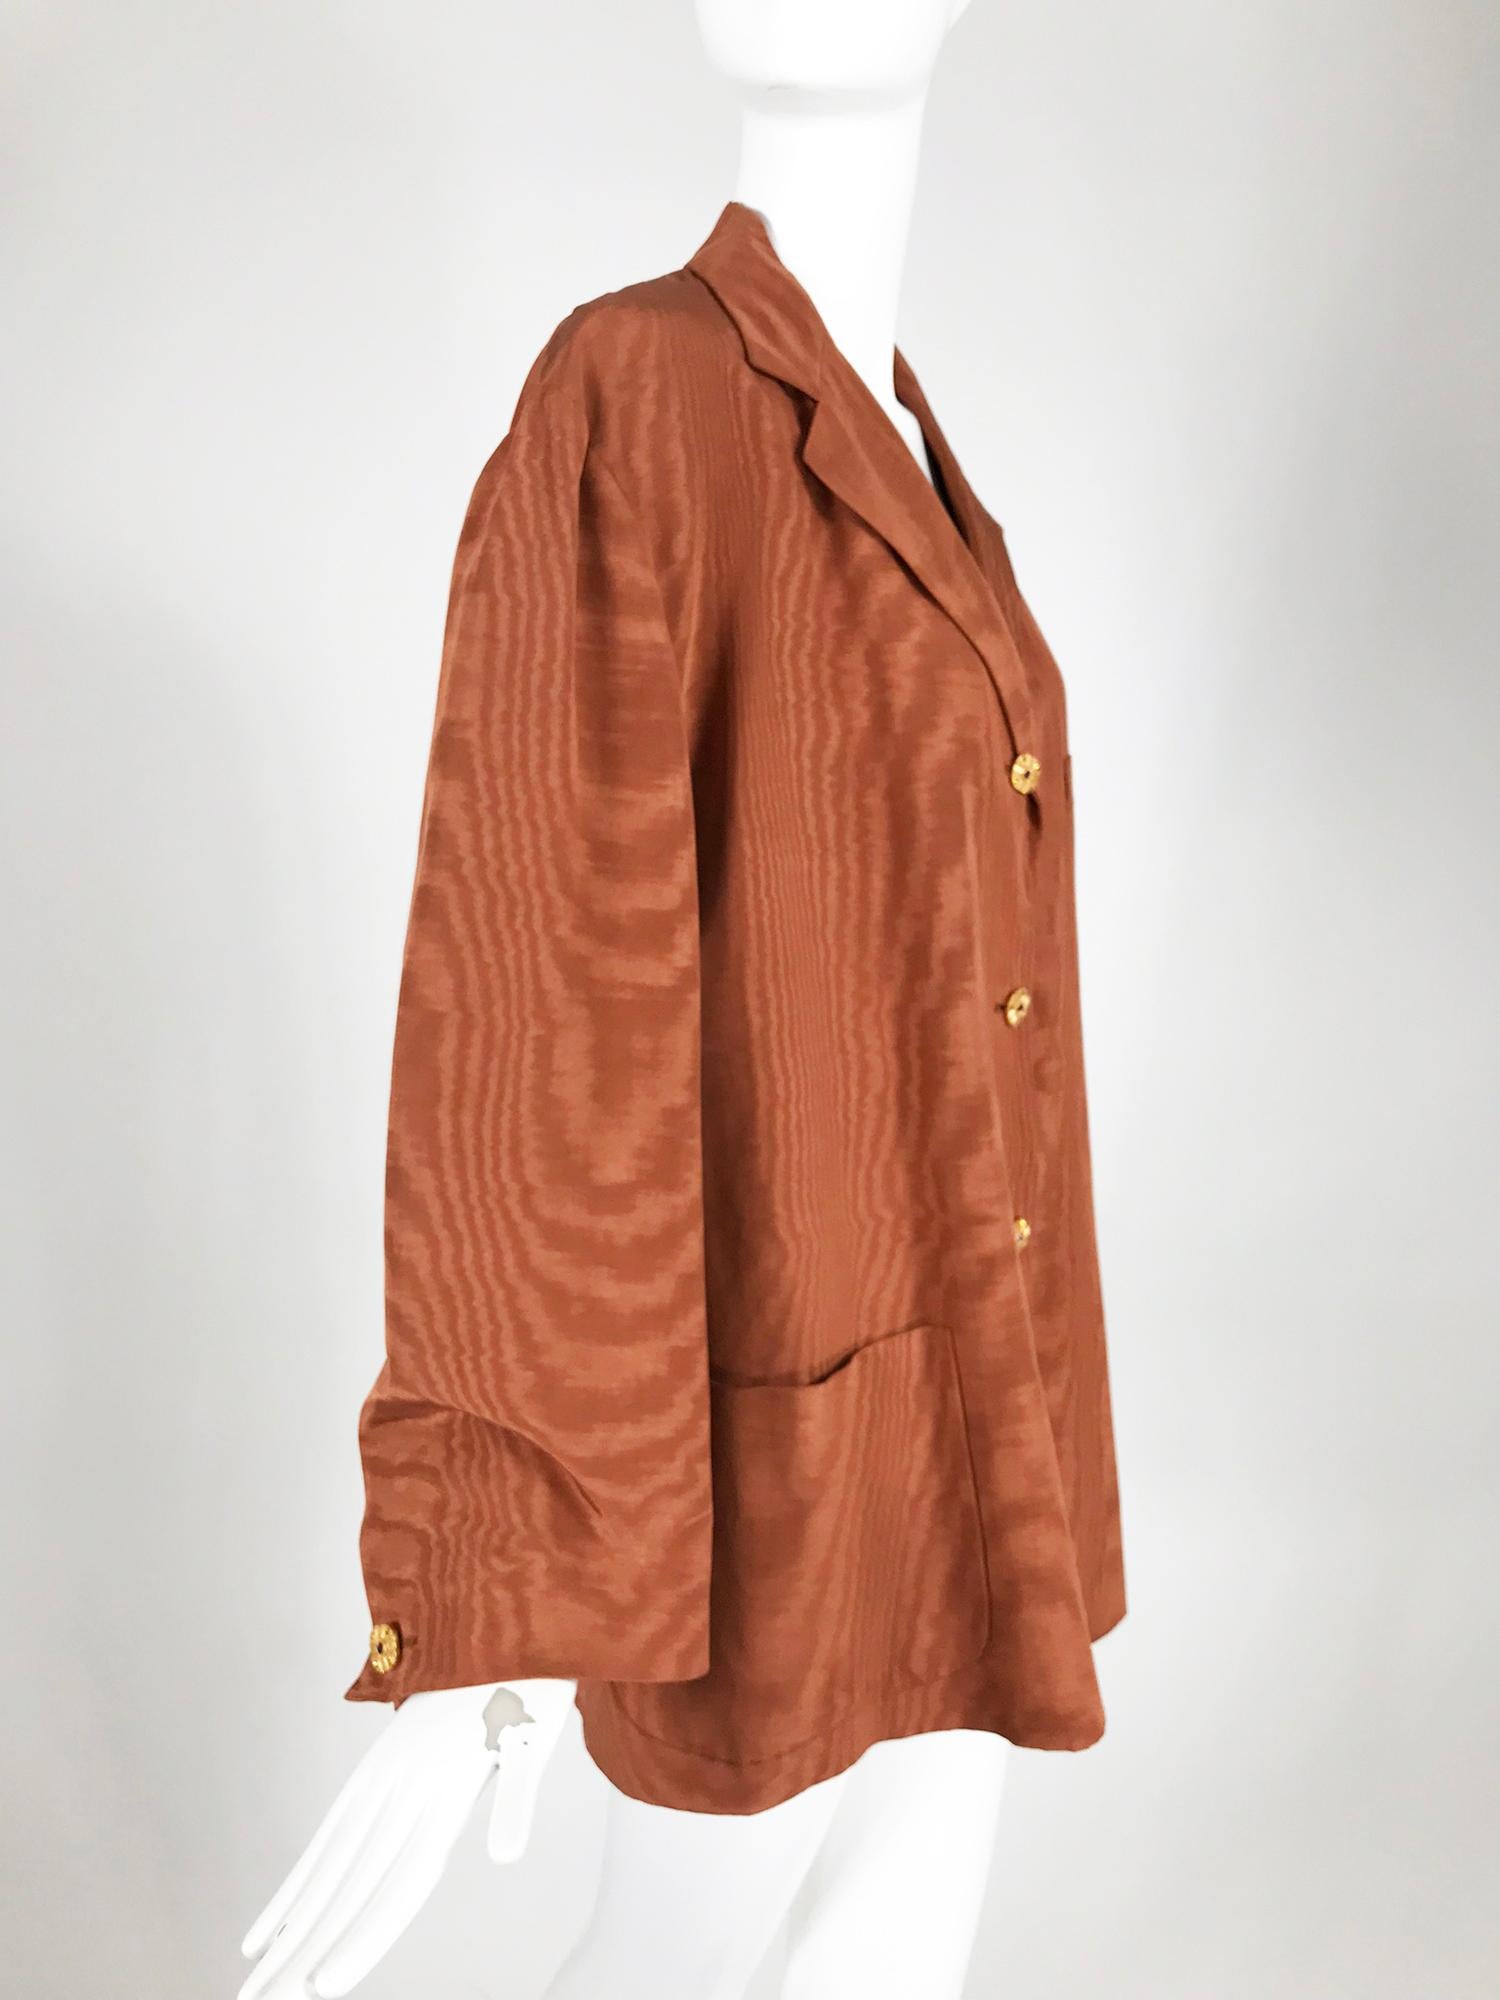 Romeo Gigli Cocoa Brown Watered Taffeta Jacket 1980s In Excellent Condition In West Palm Beach, FL